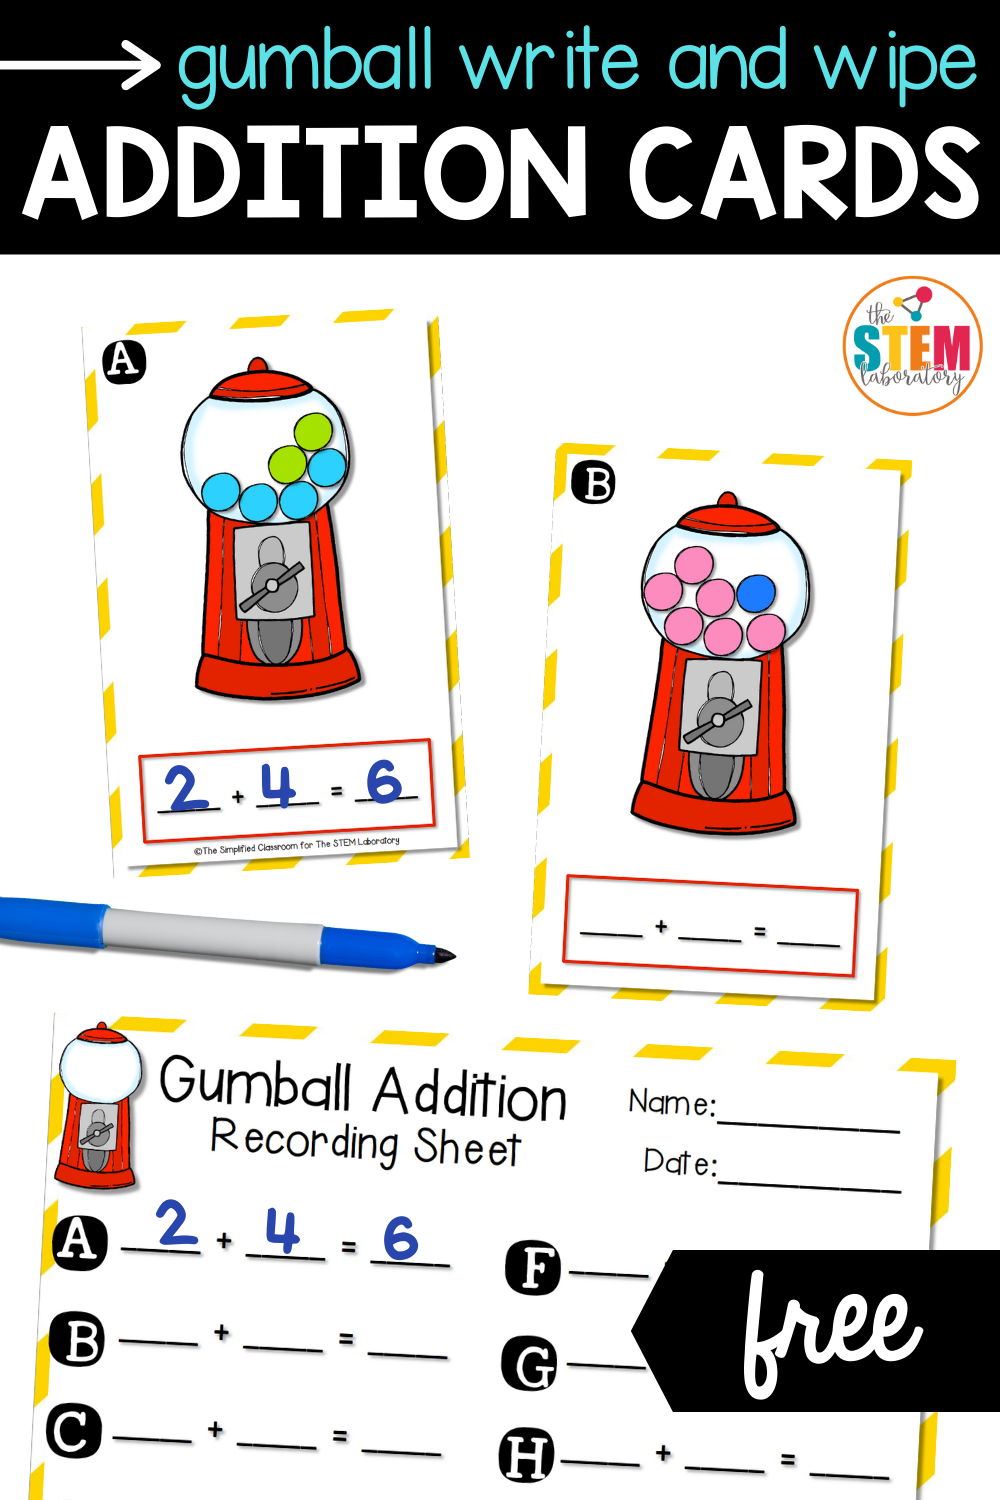 Gumball Write and Wipe Addition Cards - The Stem Laboratory